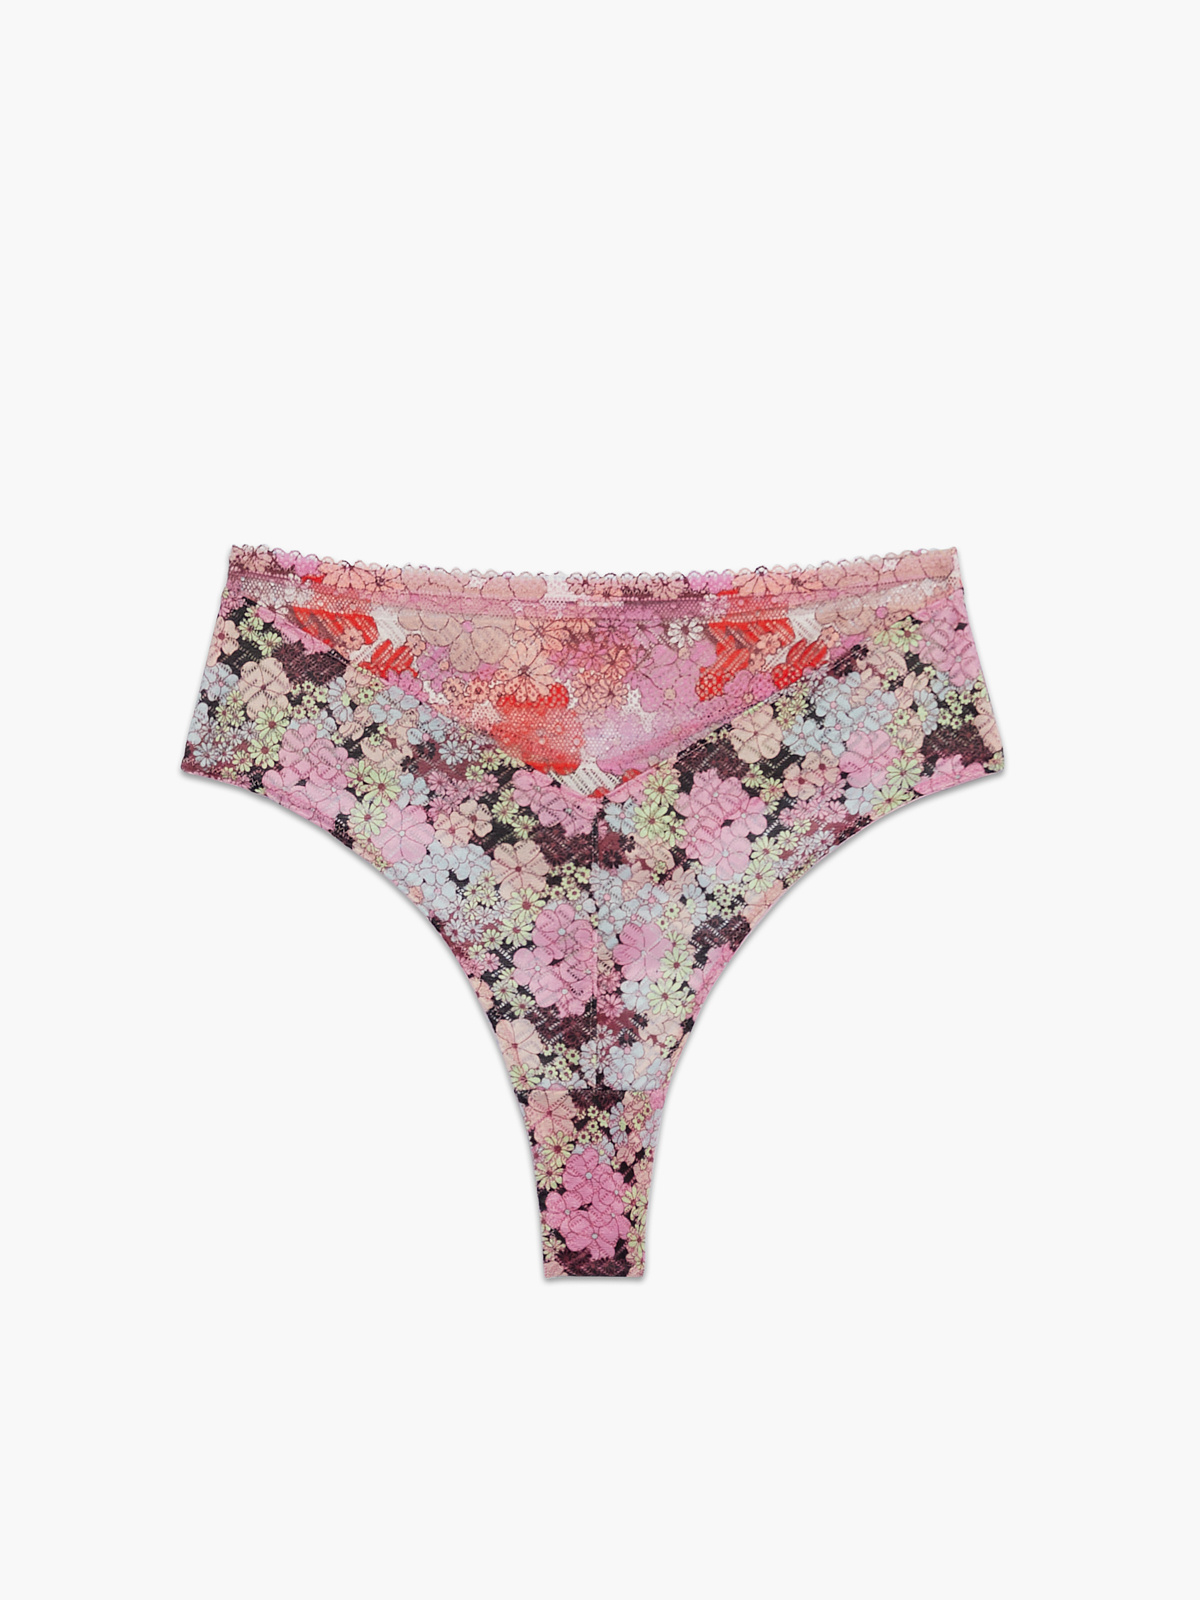 Penthouse Sweet Lace High-Waist Thong Panty in Multi & Pink